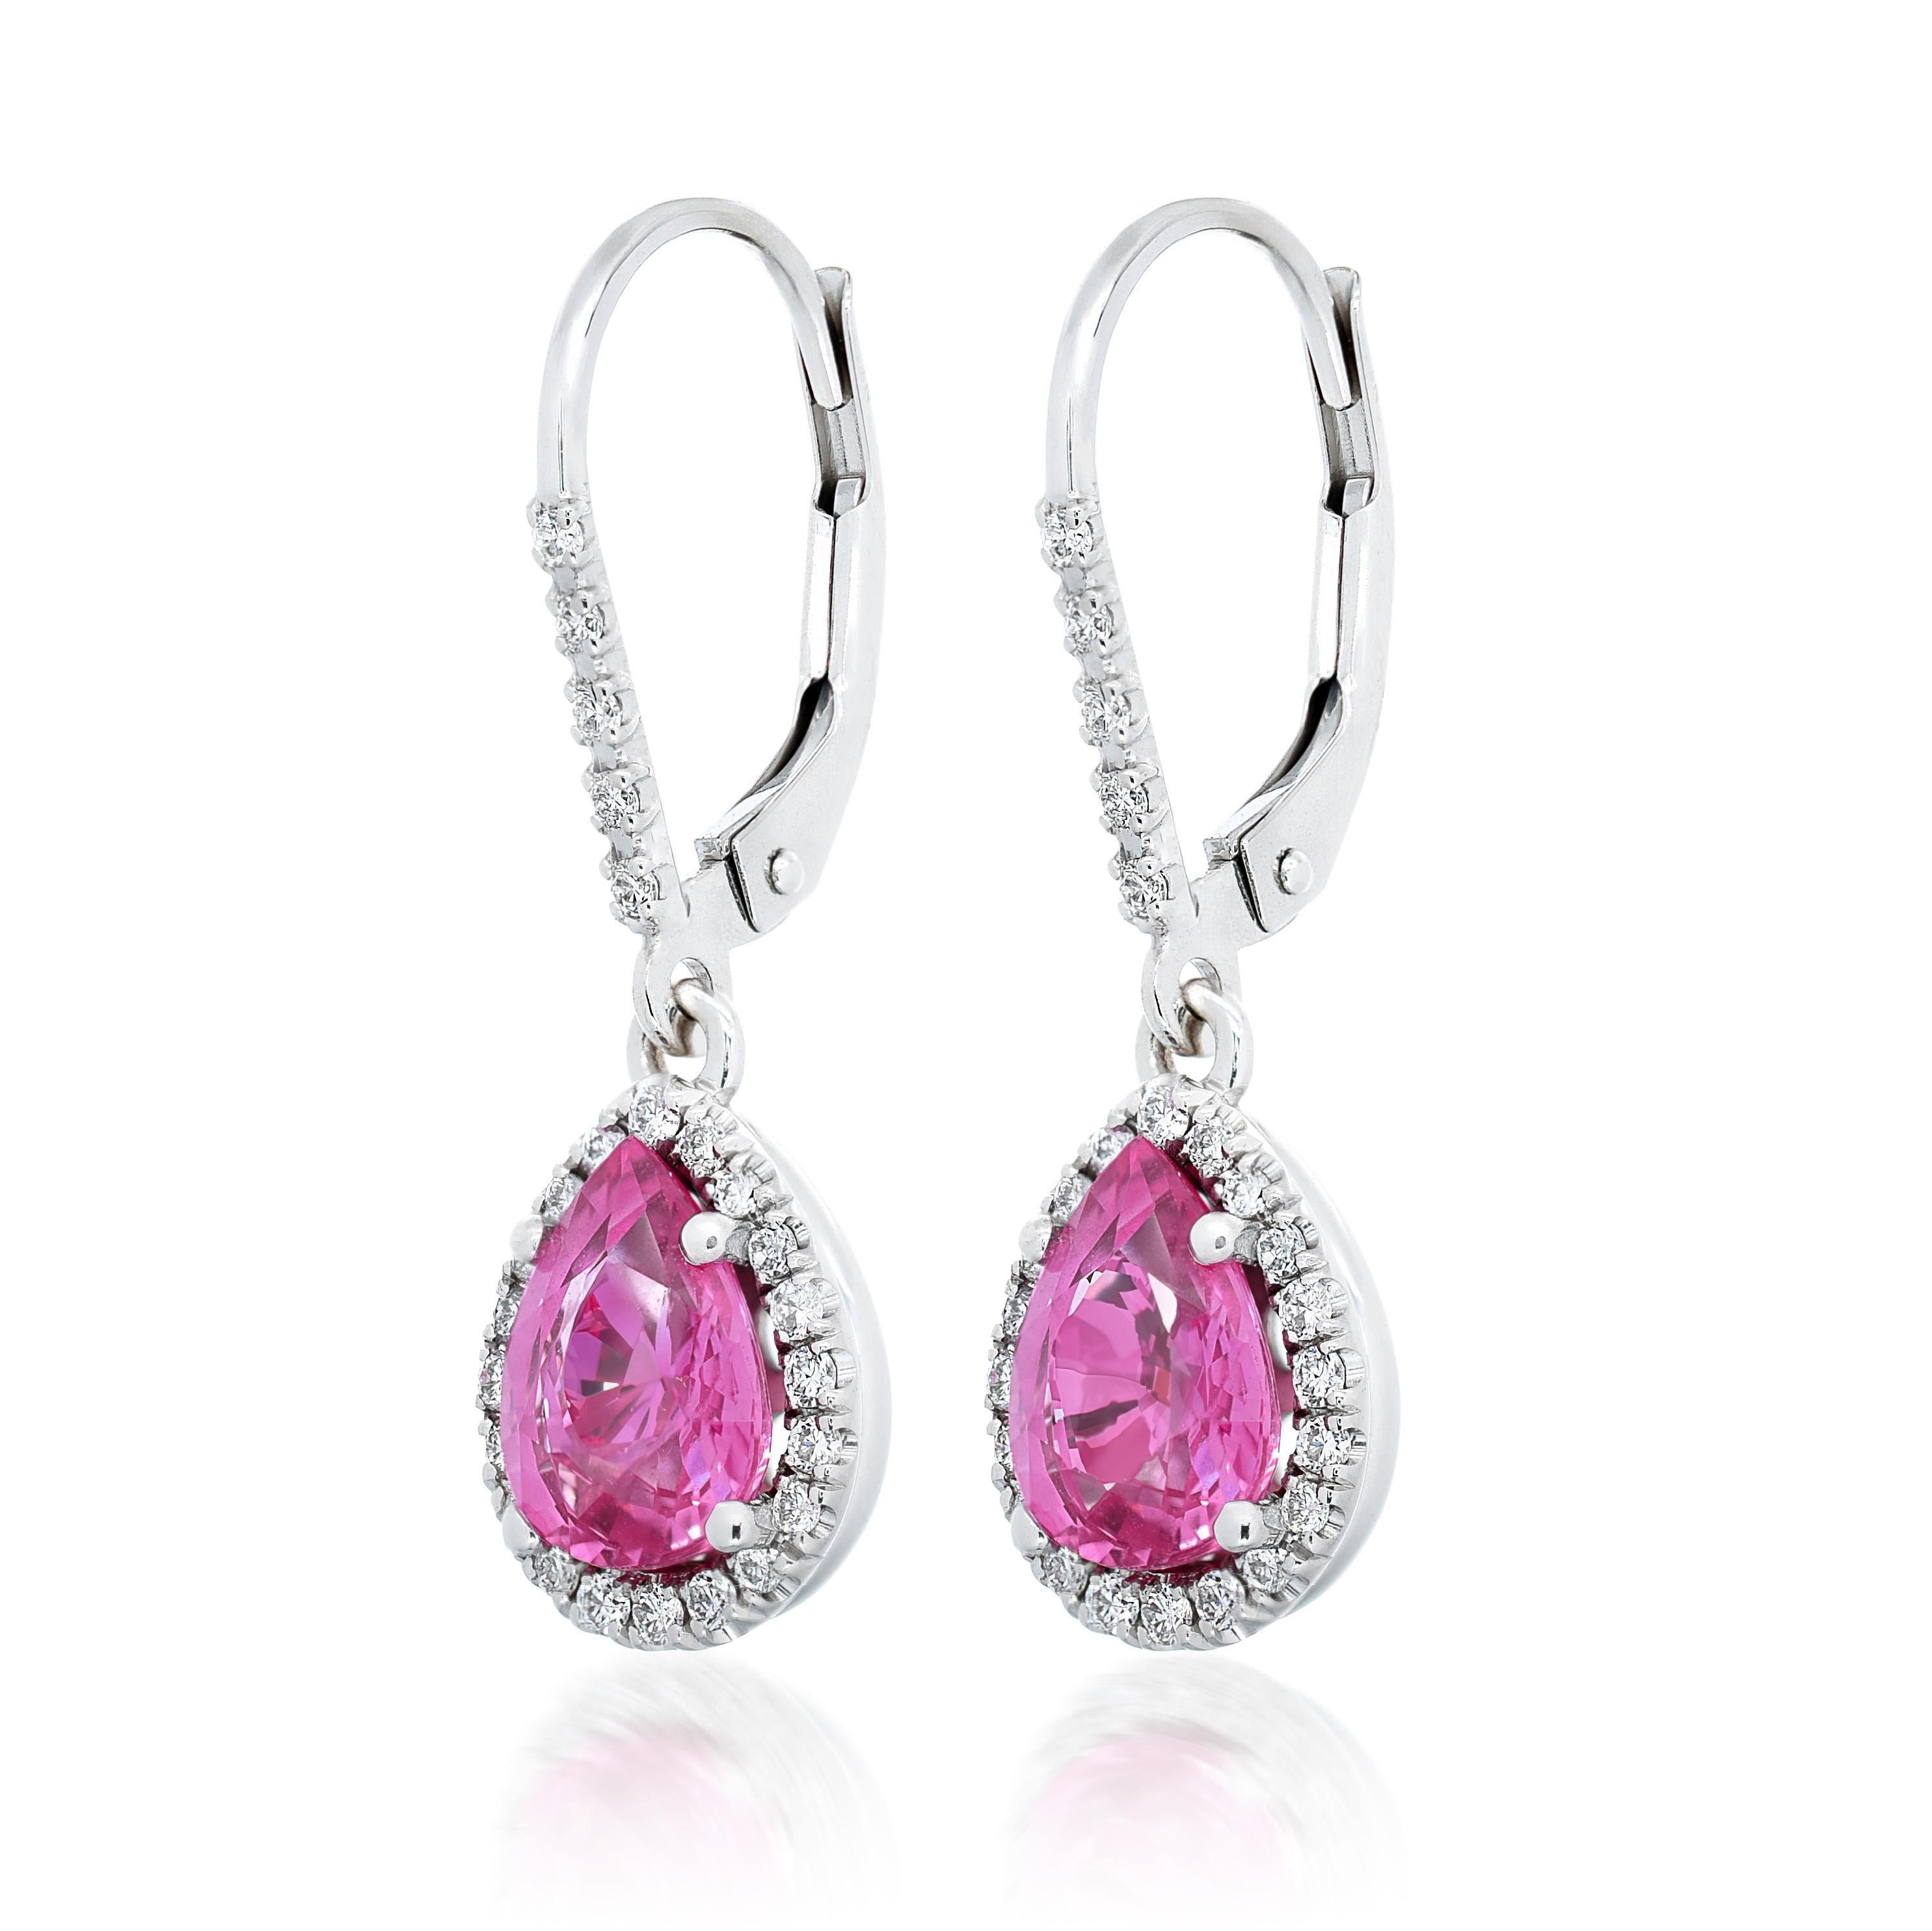 Mixed Cut GIA Certified Natural 2.72 Carats Pink Sapphire Earring Diamonds set For Sale